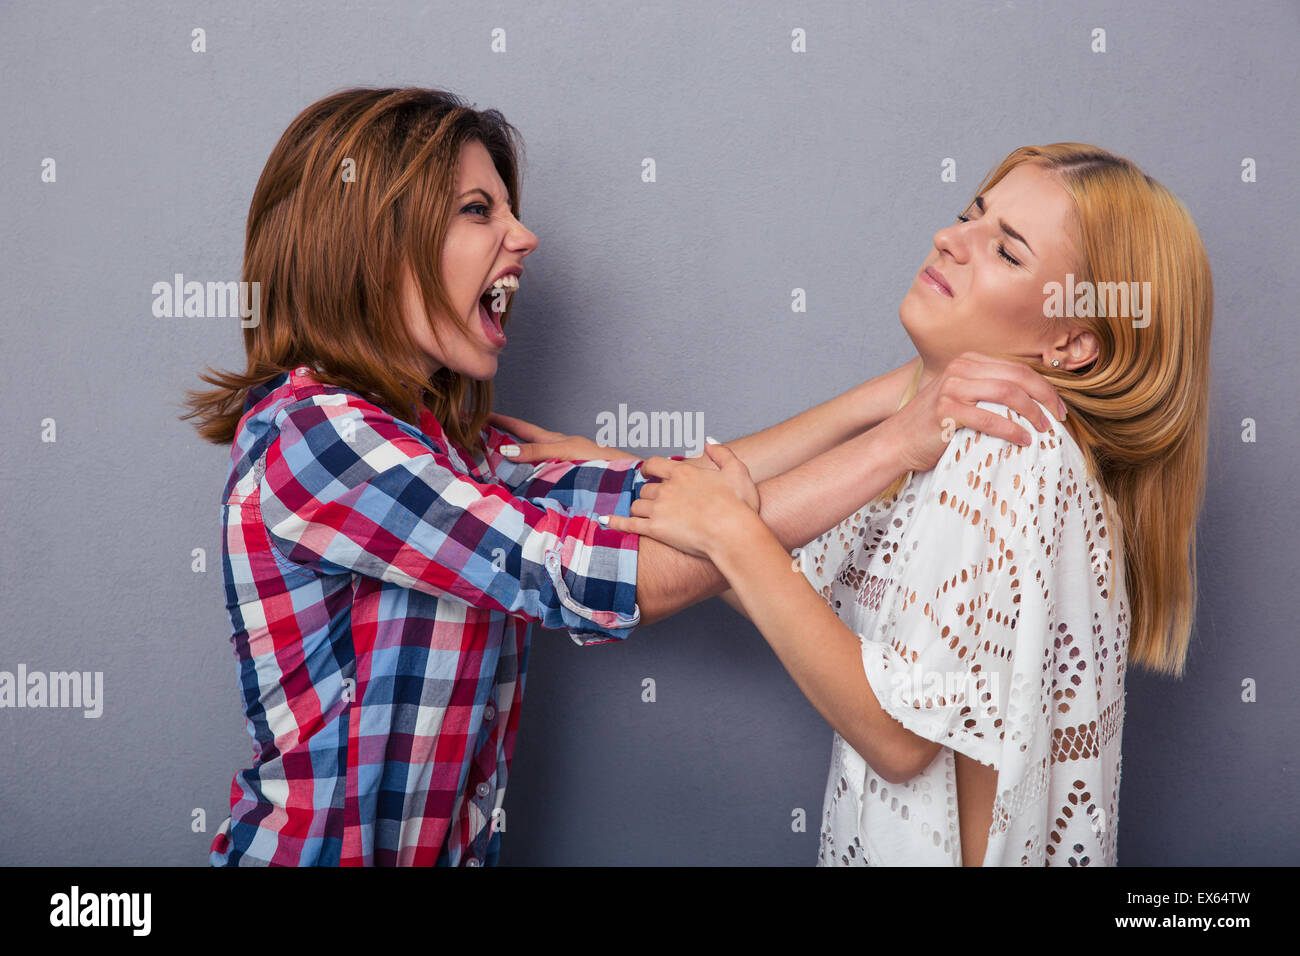 Two girl friends quarrel over gray background Stock Photo